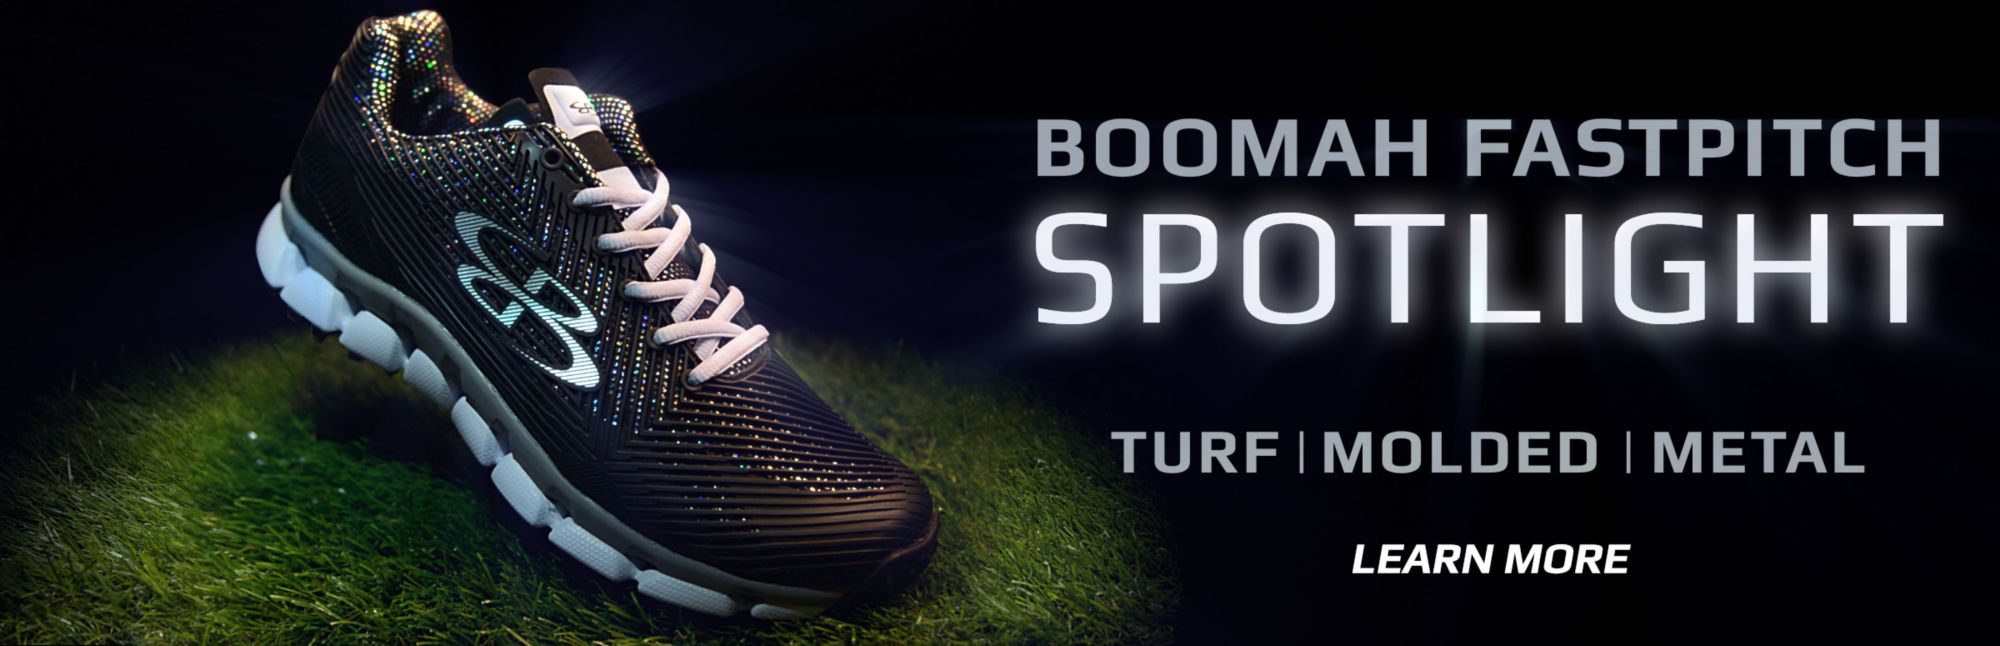 Boombah Fastpitch Spotlight Series Shoes